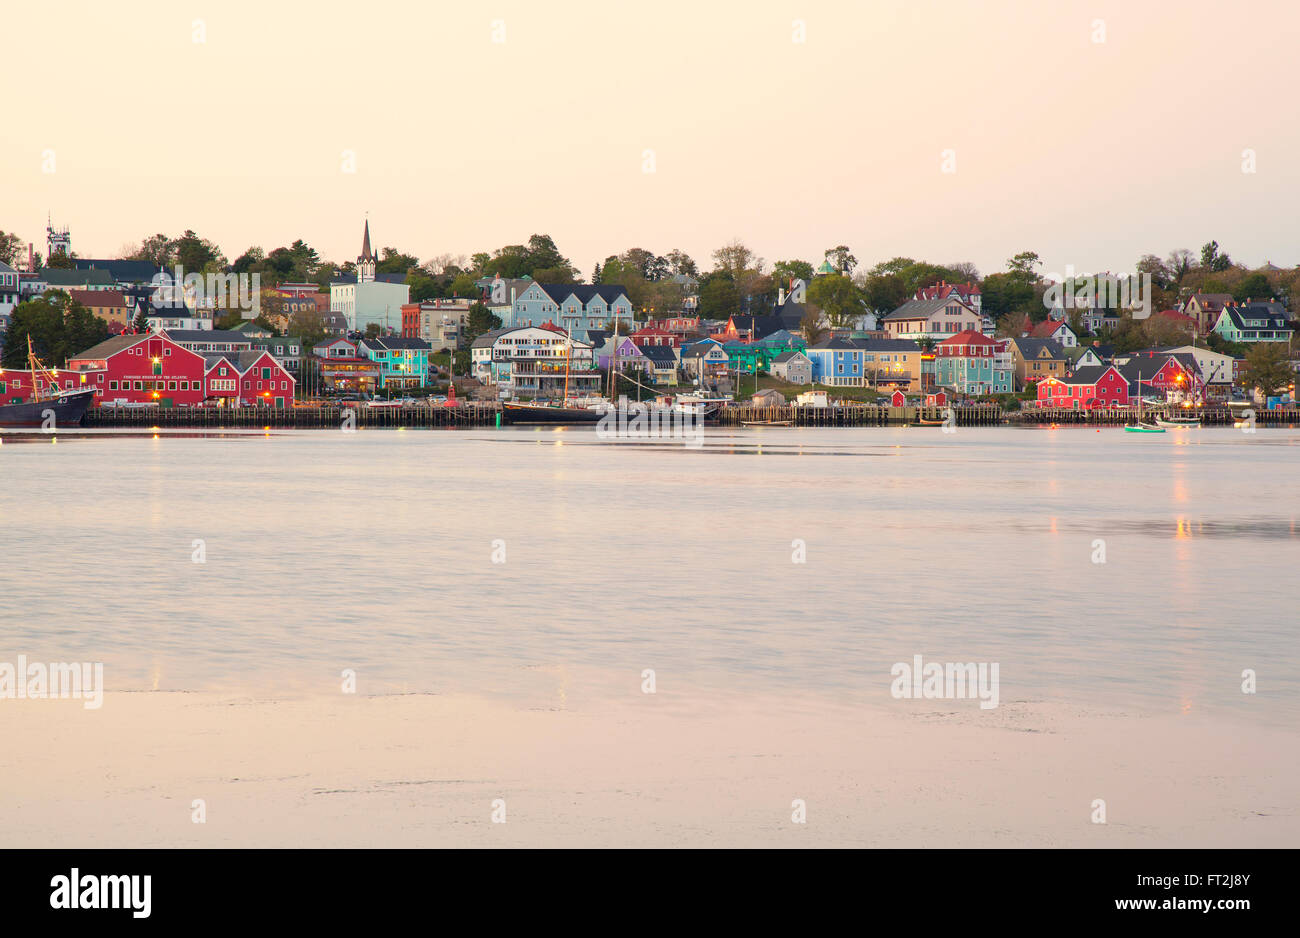 Lunenburg is a Canadian port town in Lunenburg County, Nova Scotia. Situated on the province's South Shore, Lunenburg is located Stock Photo